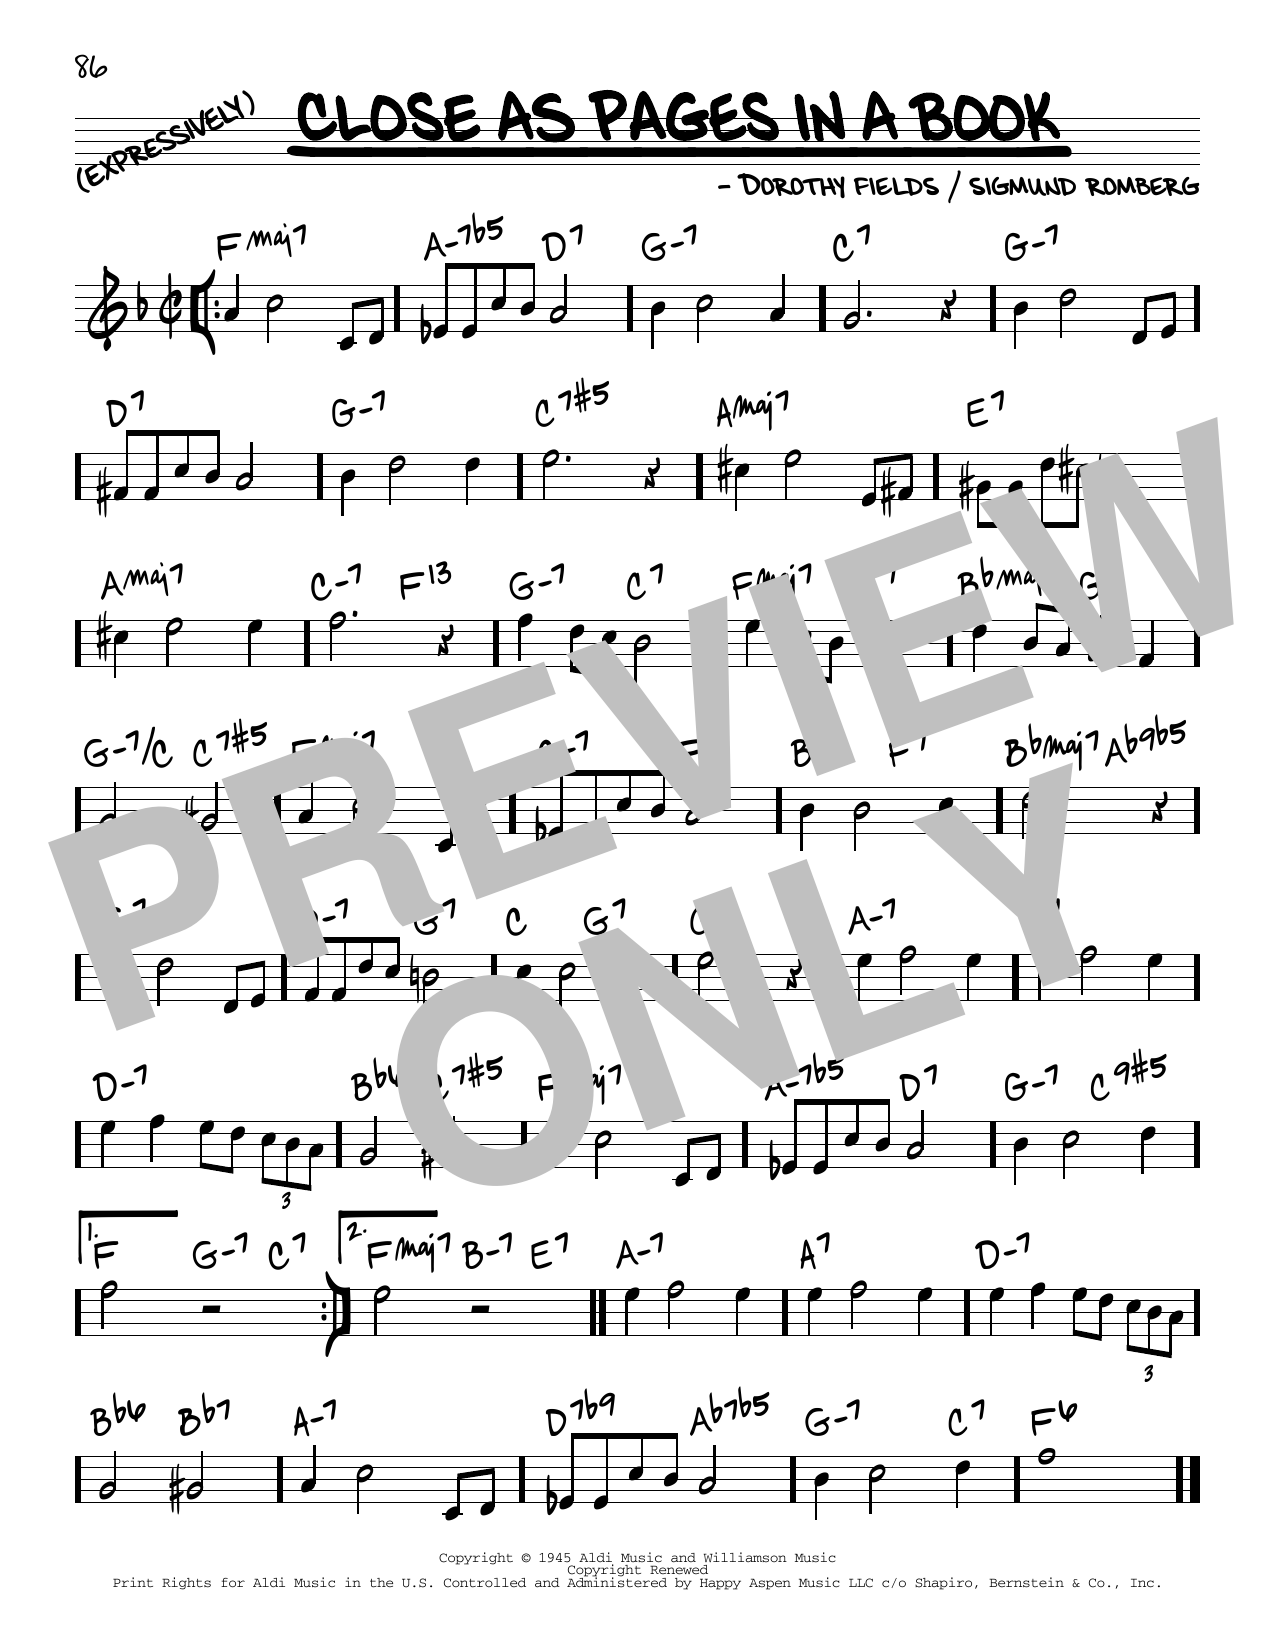 Download Dorothy Fields Close As Pages In A Book Sheet Music